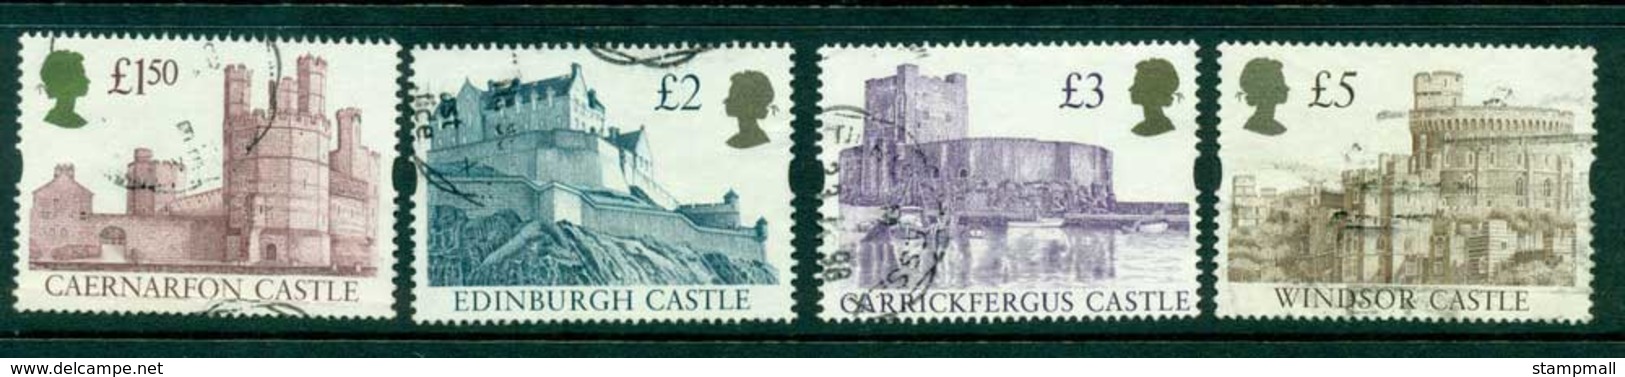 GB 1997 £1.50,2,2 & £5 Redrawn Syncopated Castles FU Lot26467 - Unclassified